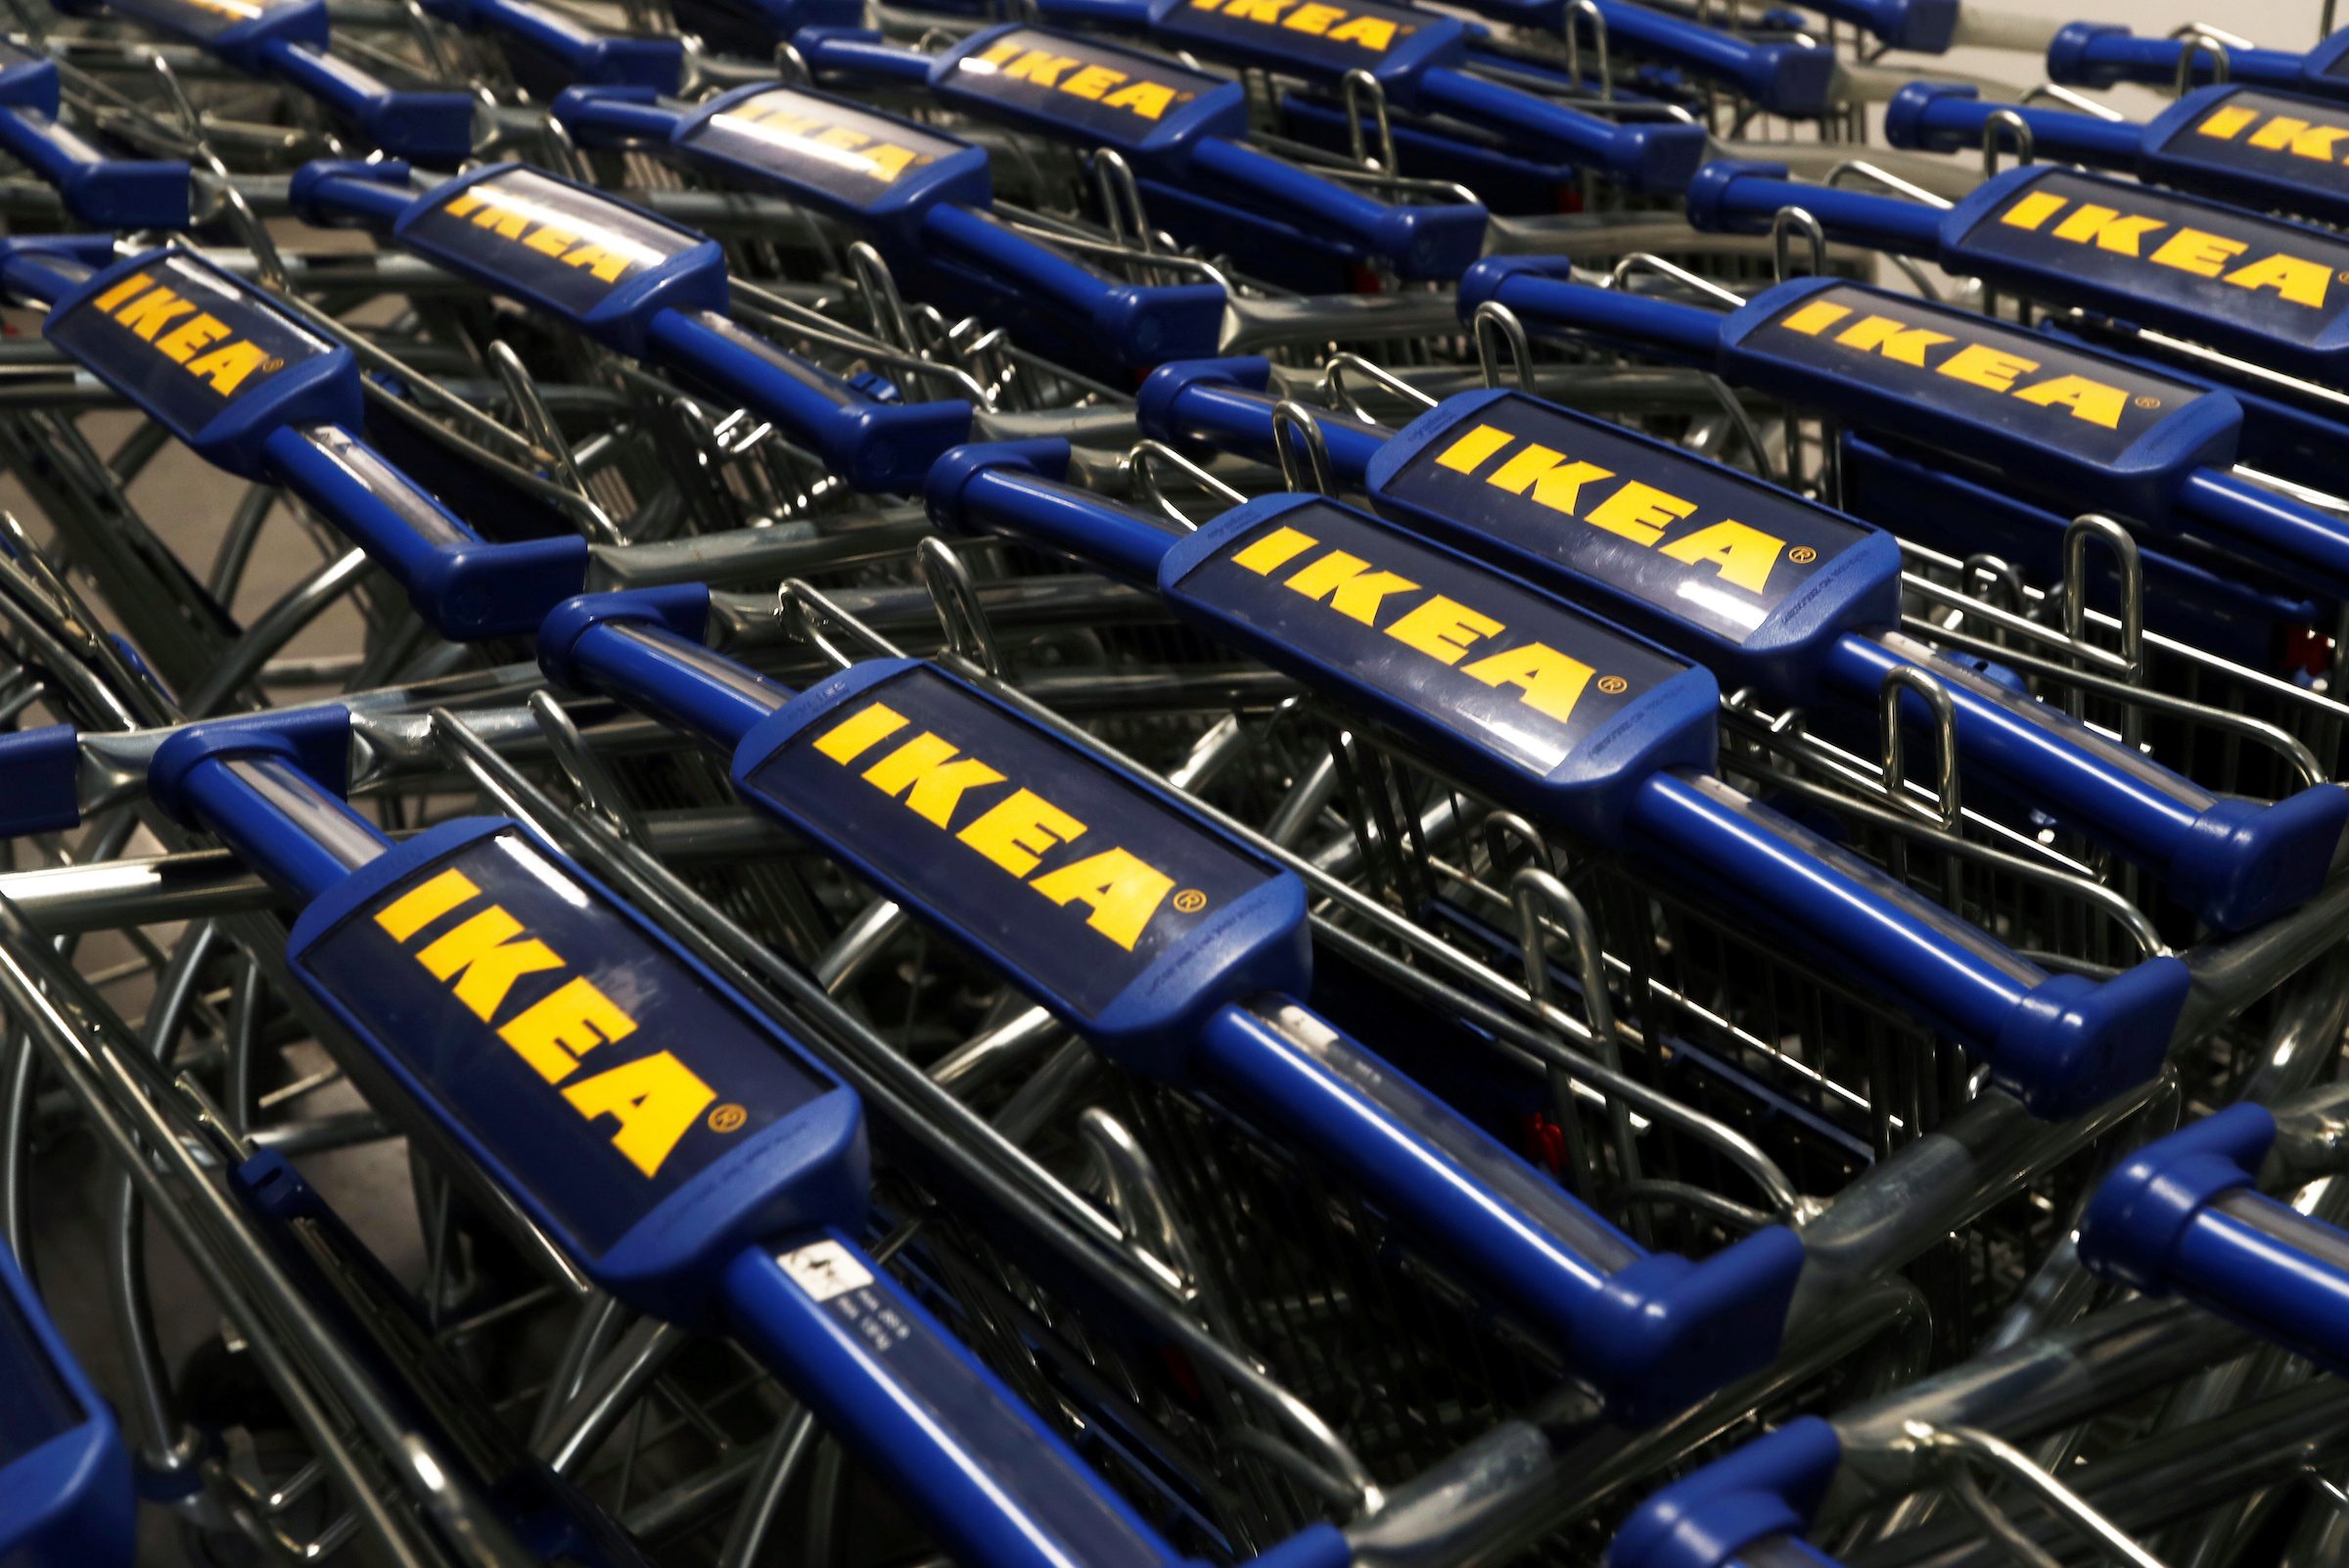 IKEA branches out into consumer banking